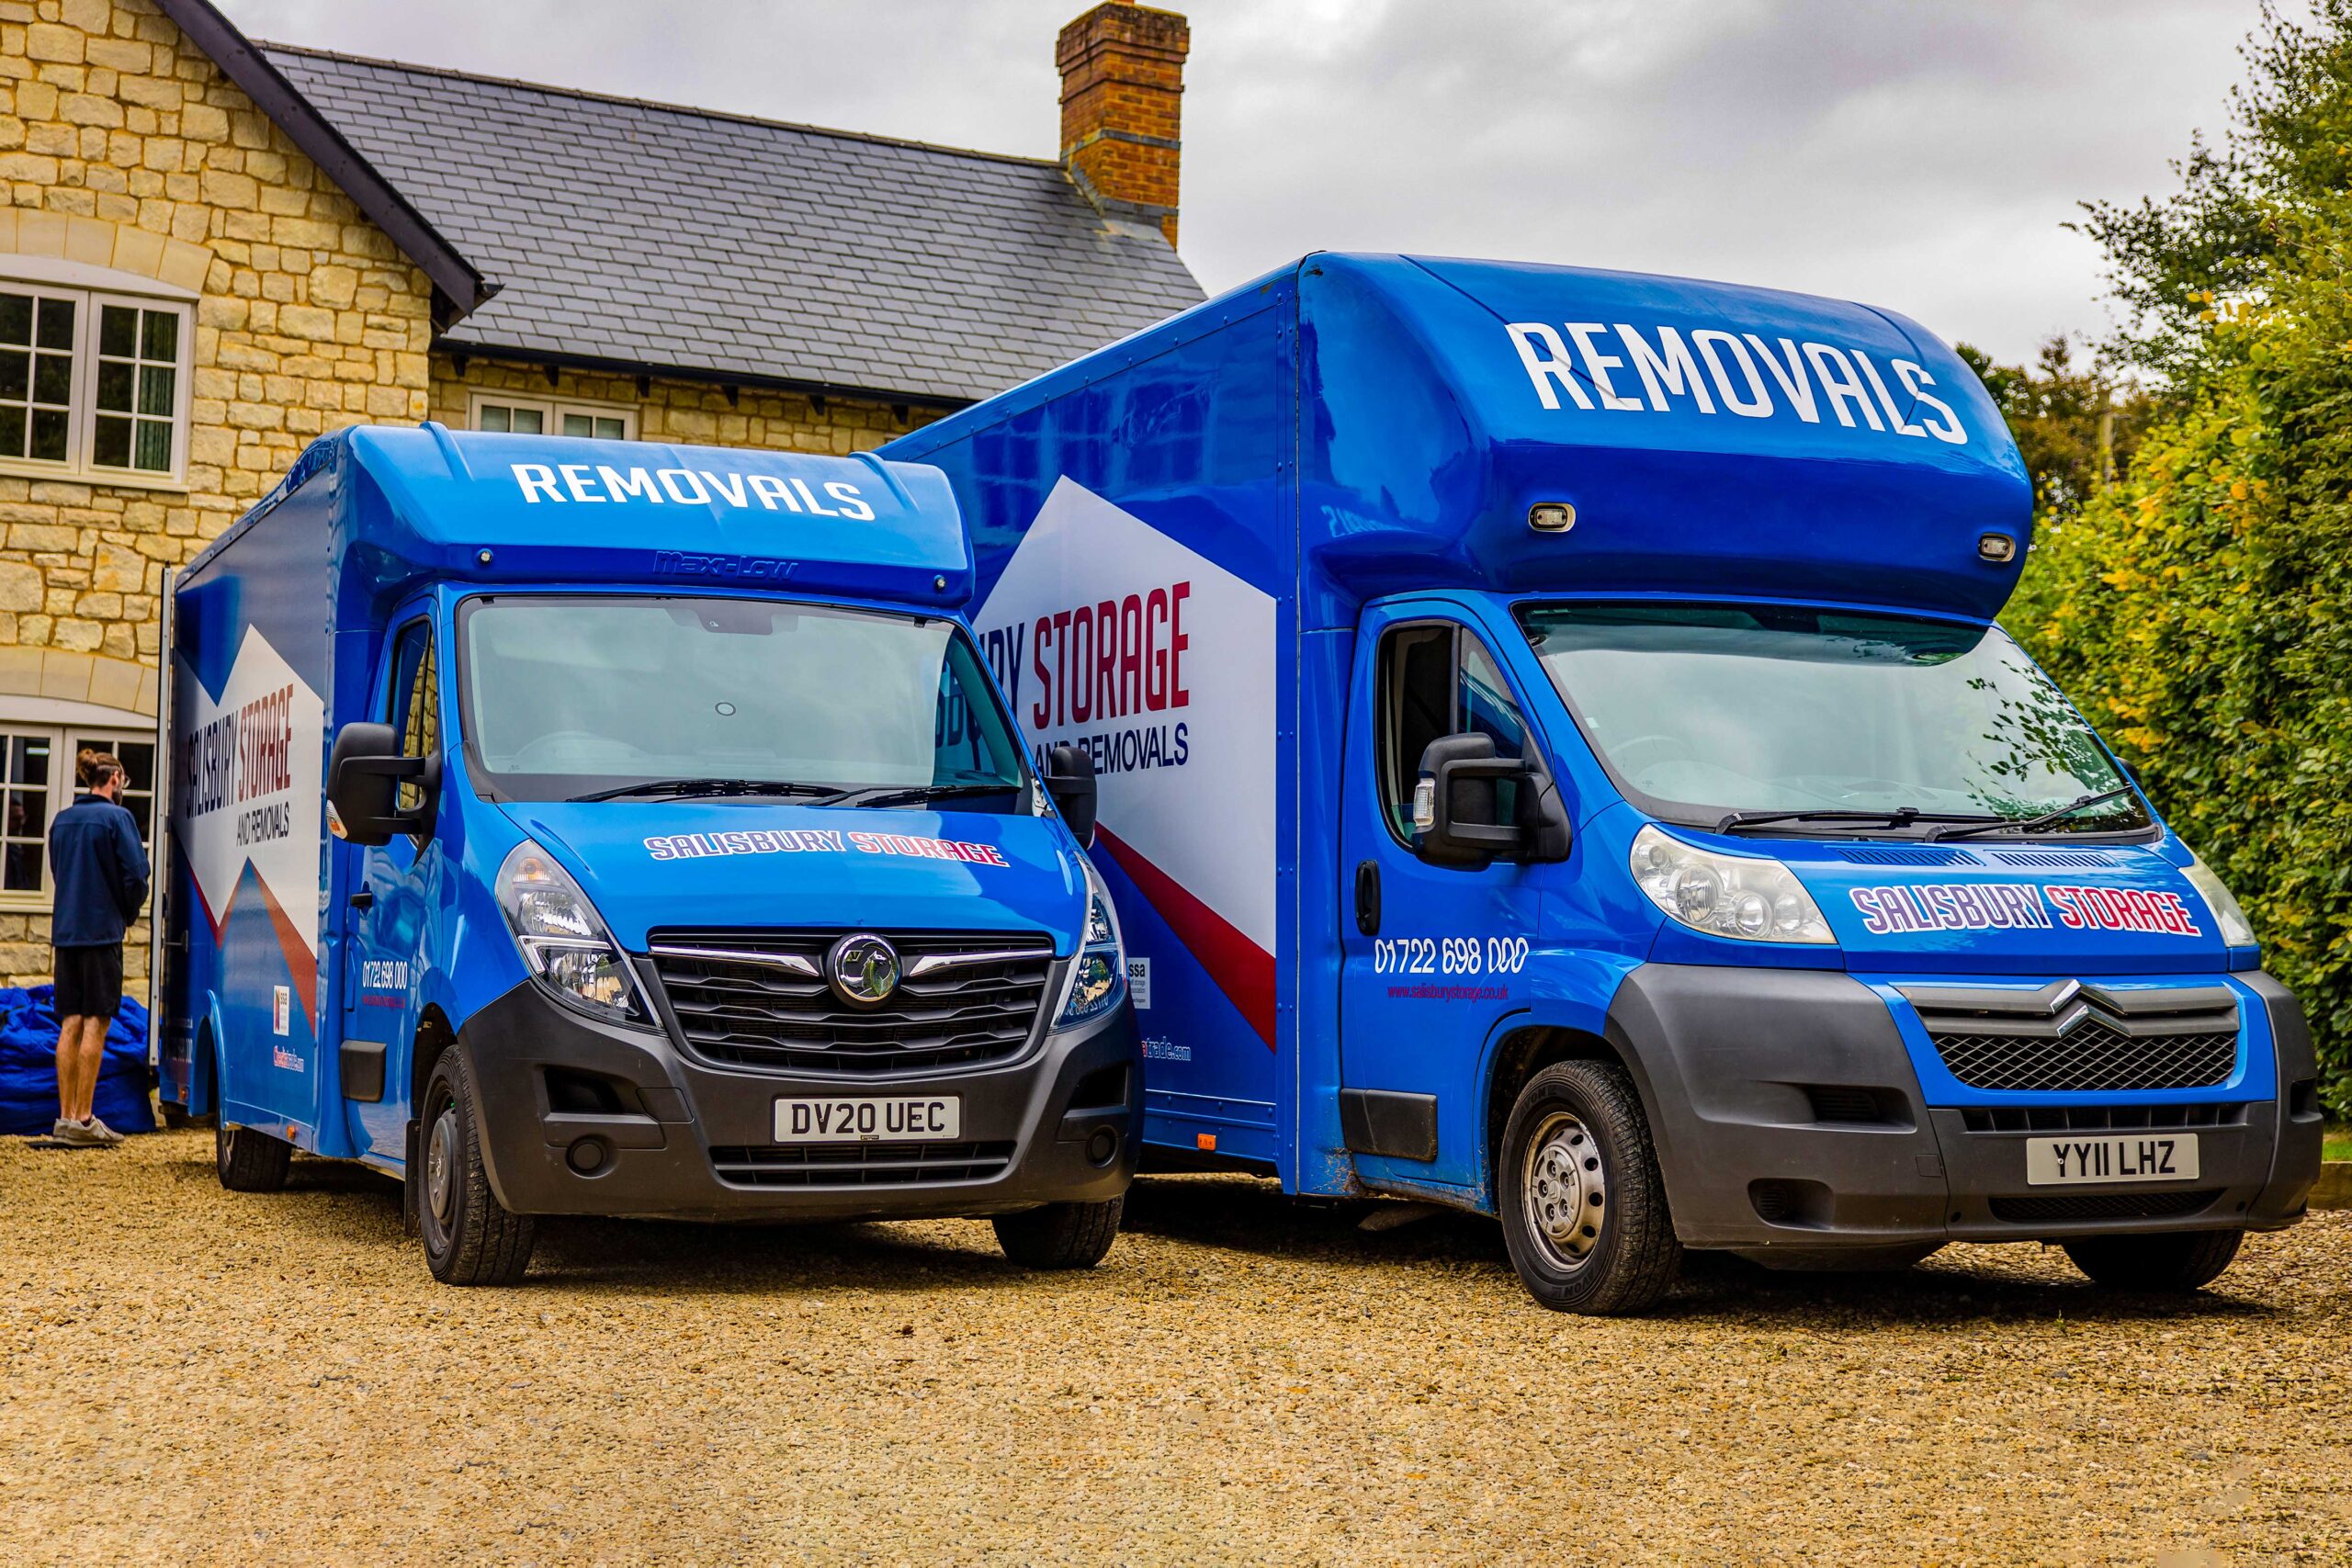 Two blue salisbury storage and removals vans parked in front of a house, ready to transport belongings.